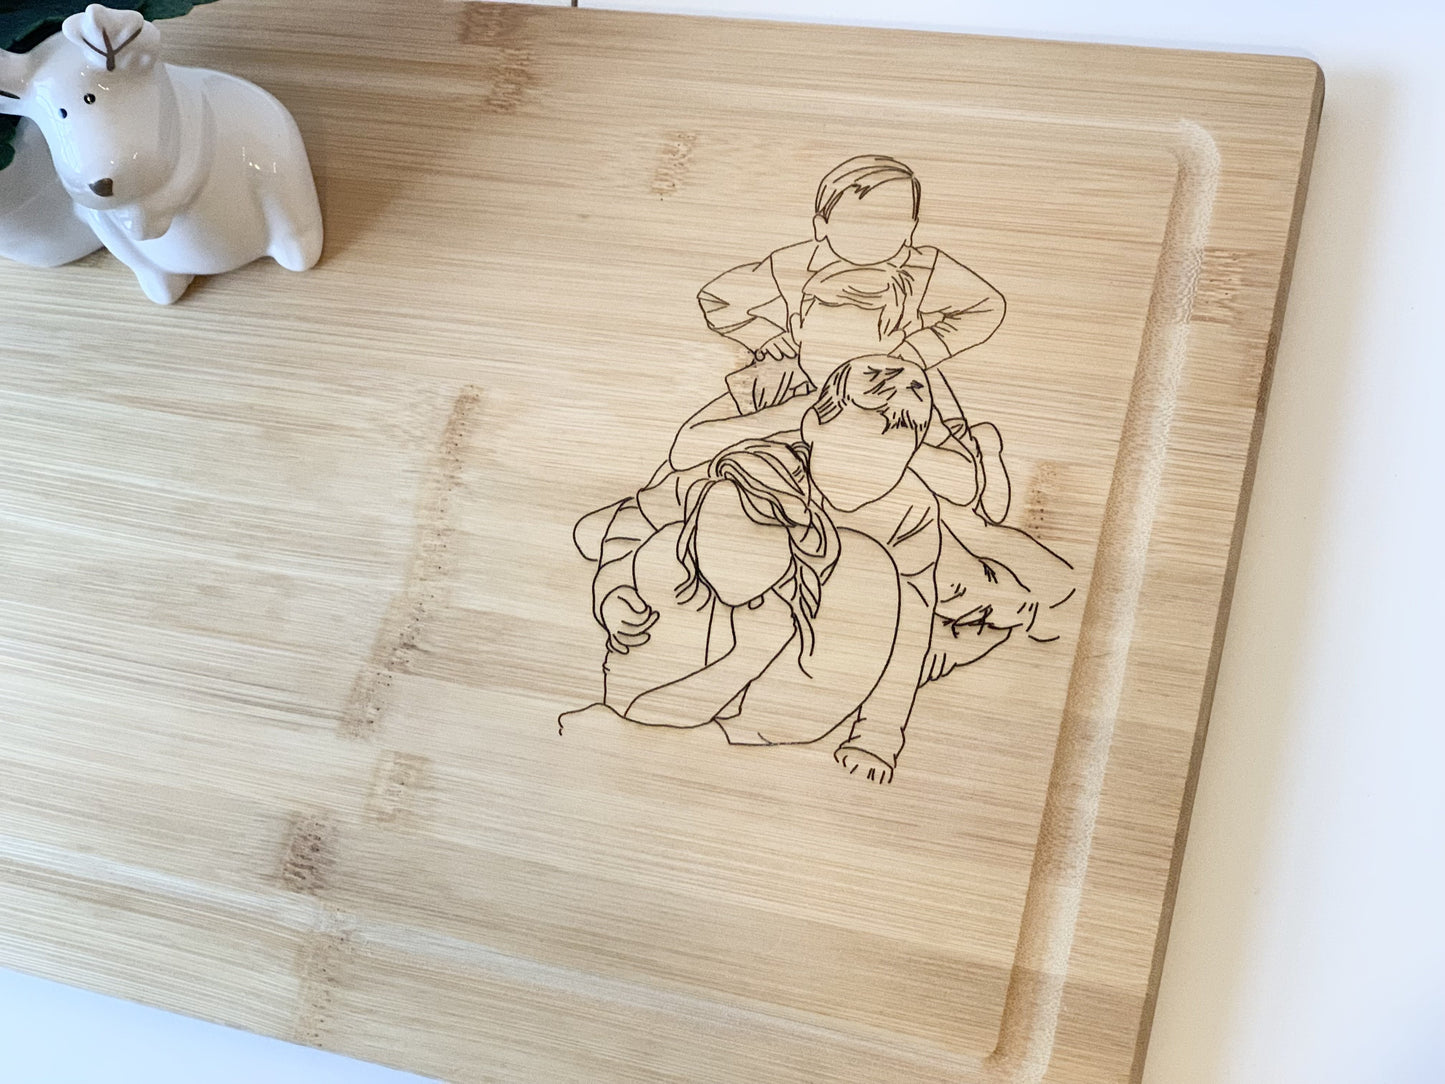 Personalized Family Portrait Line Drawing Cutting / Serving / Charcuterie Board